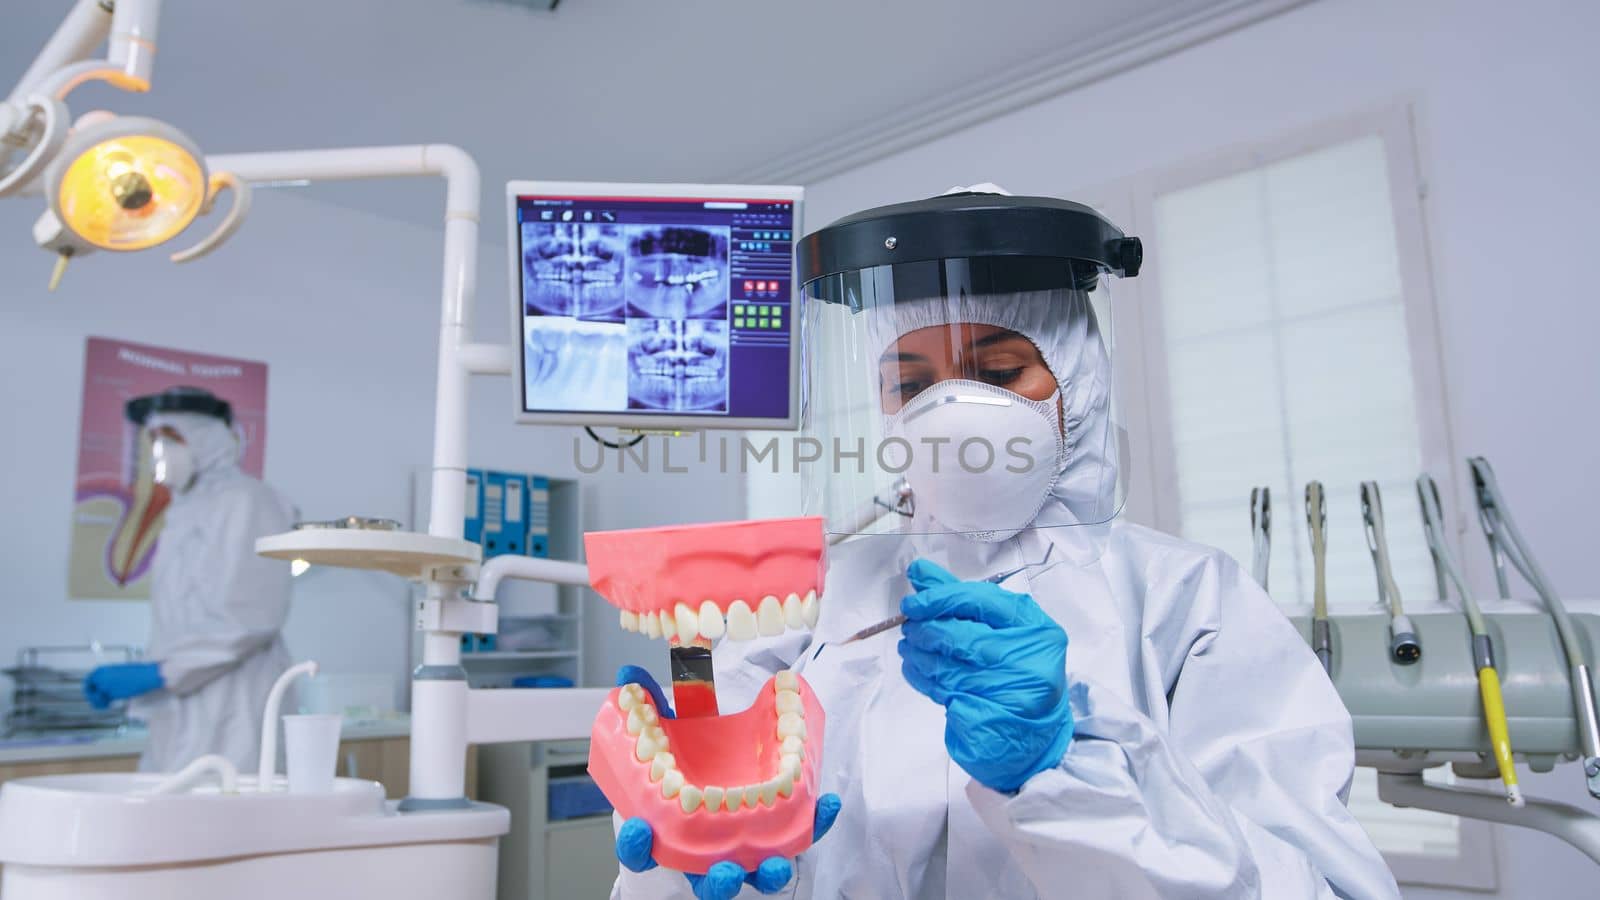 Patient pov of dentist showing correct way of cleaning teeth wearing precaution against covid in dental office using skeleton accessory. Stomatolog wearing safety gear during heatlhcare check